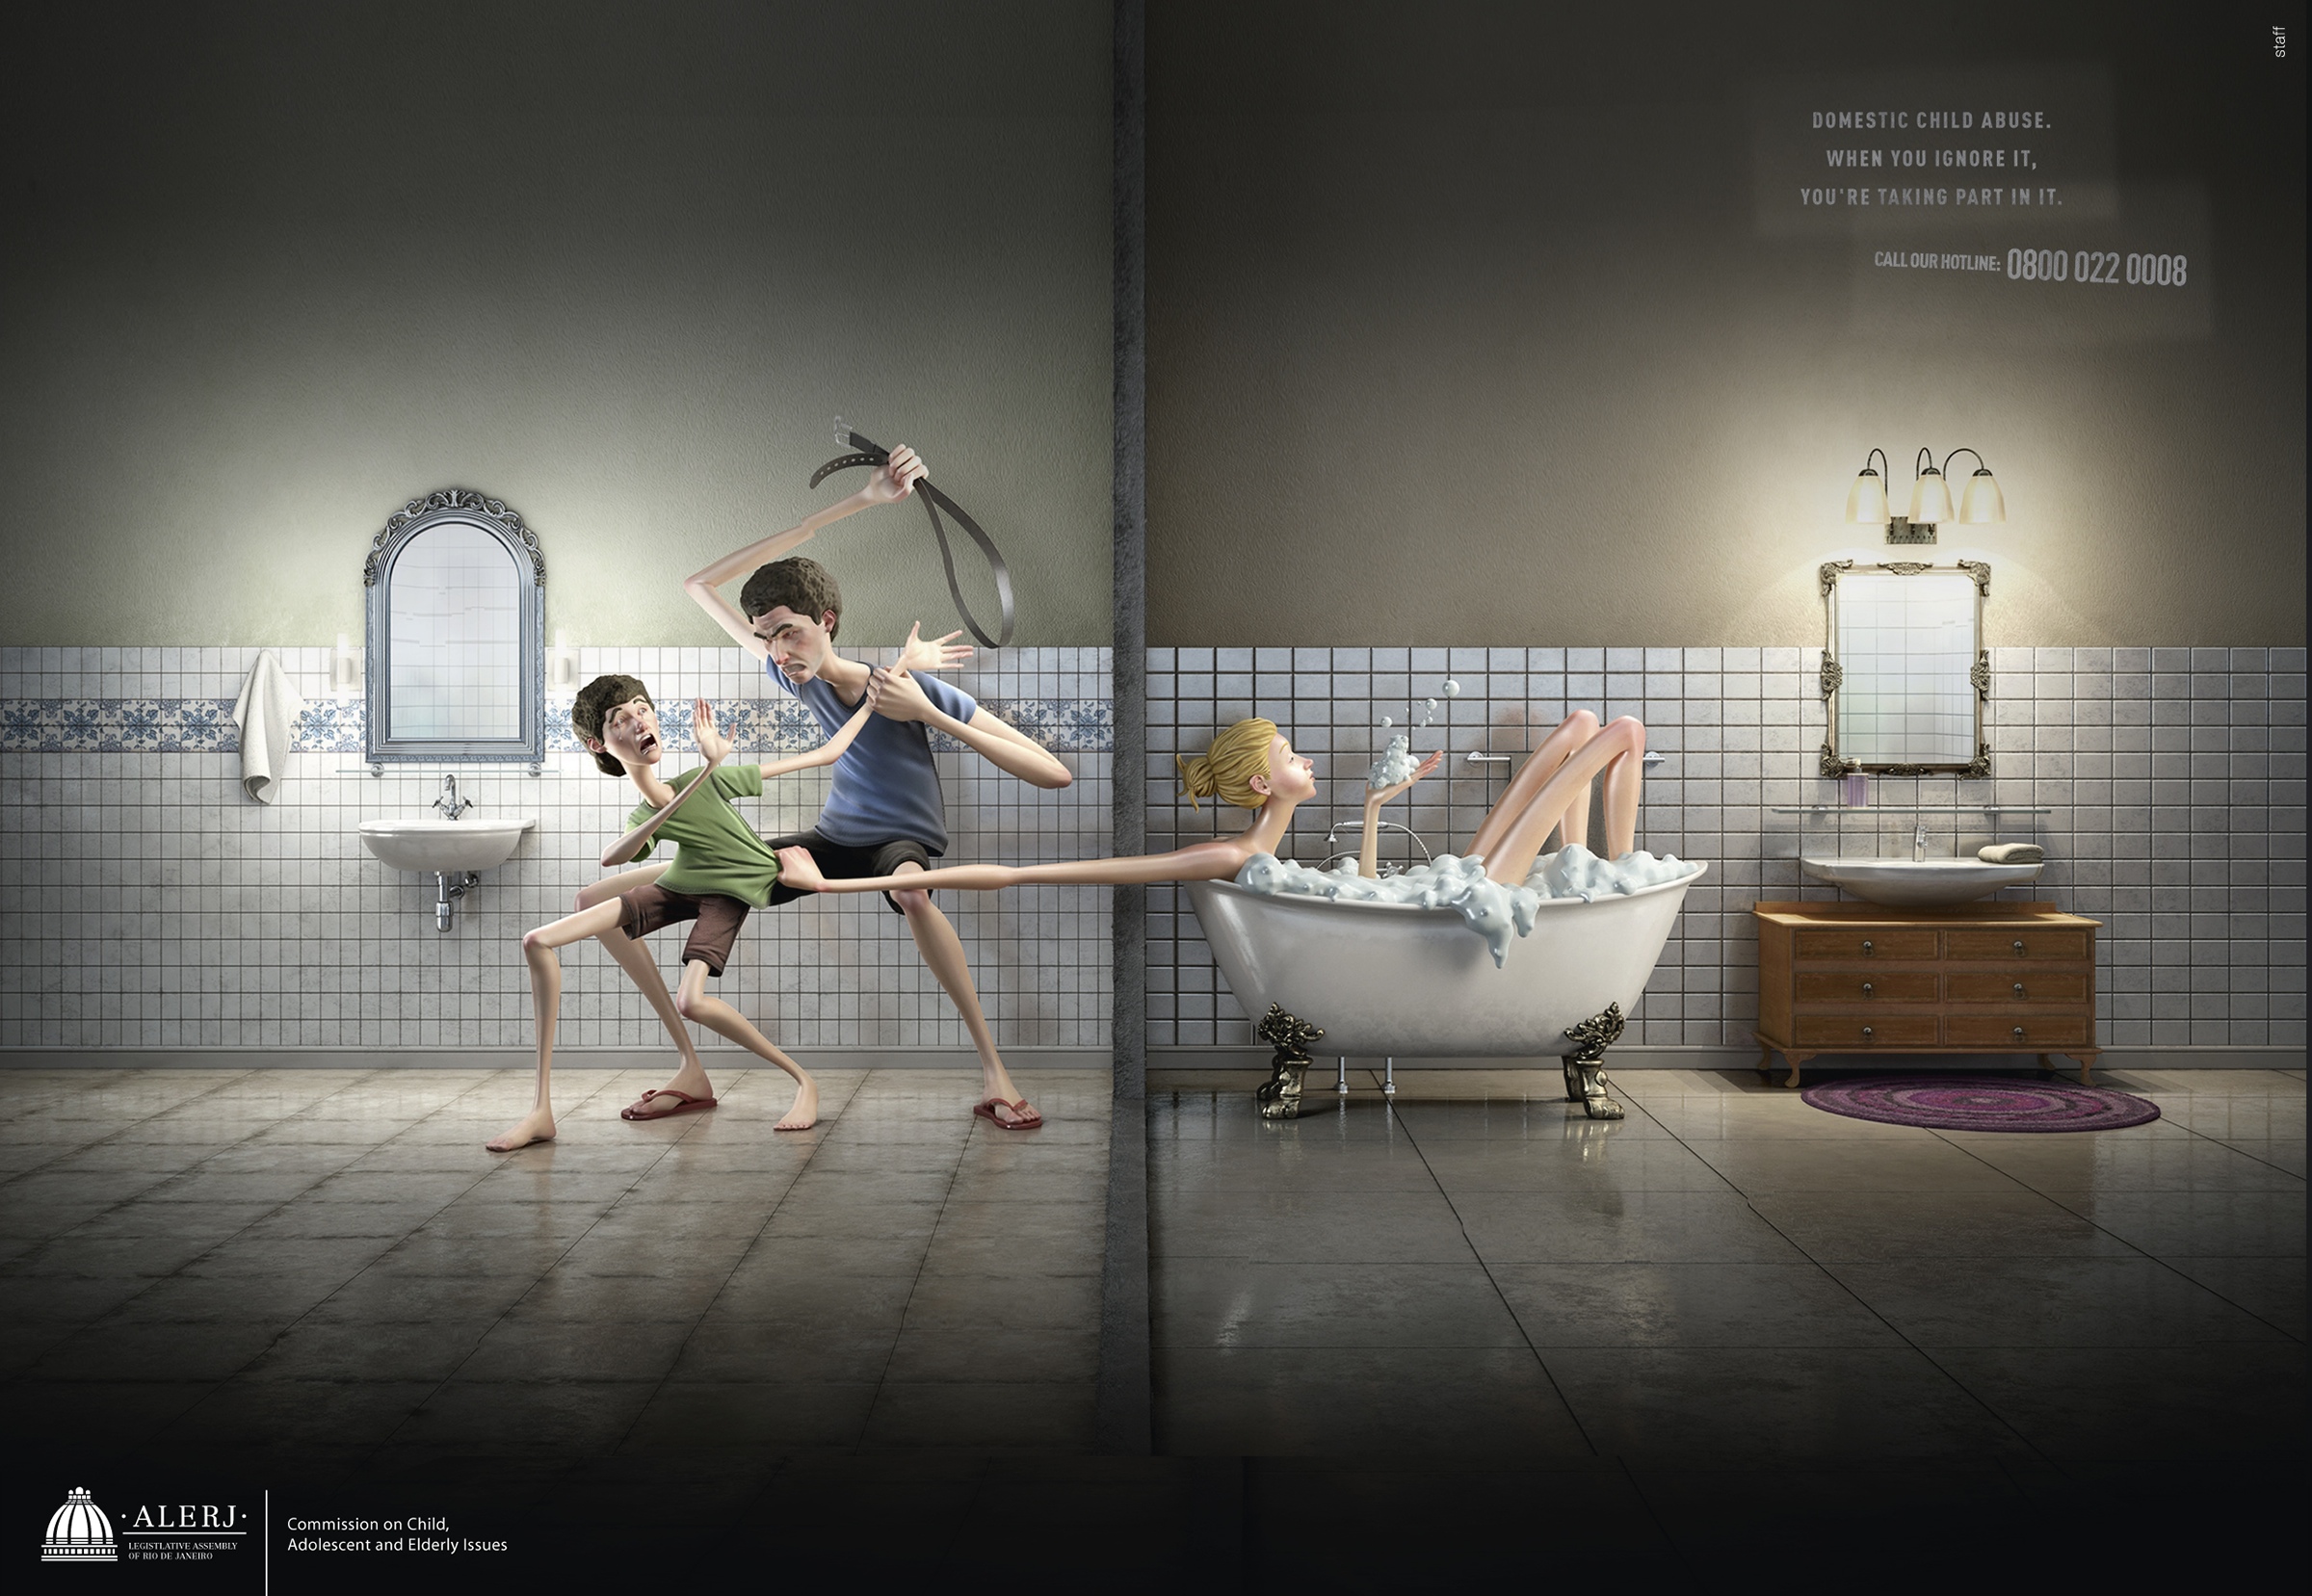 Domestic Child Abuse. When you ignore it, you’re taking part in it. domestic child abuse Campaigns of the World®